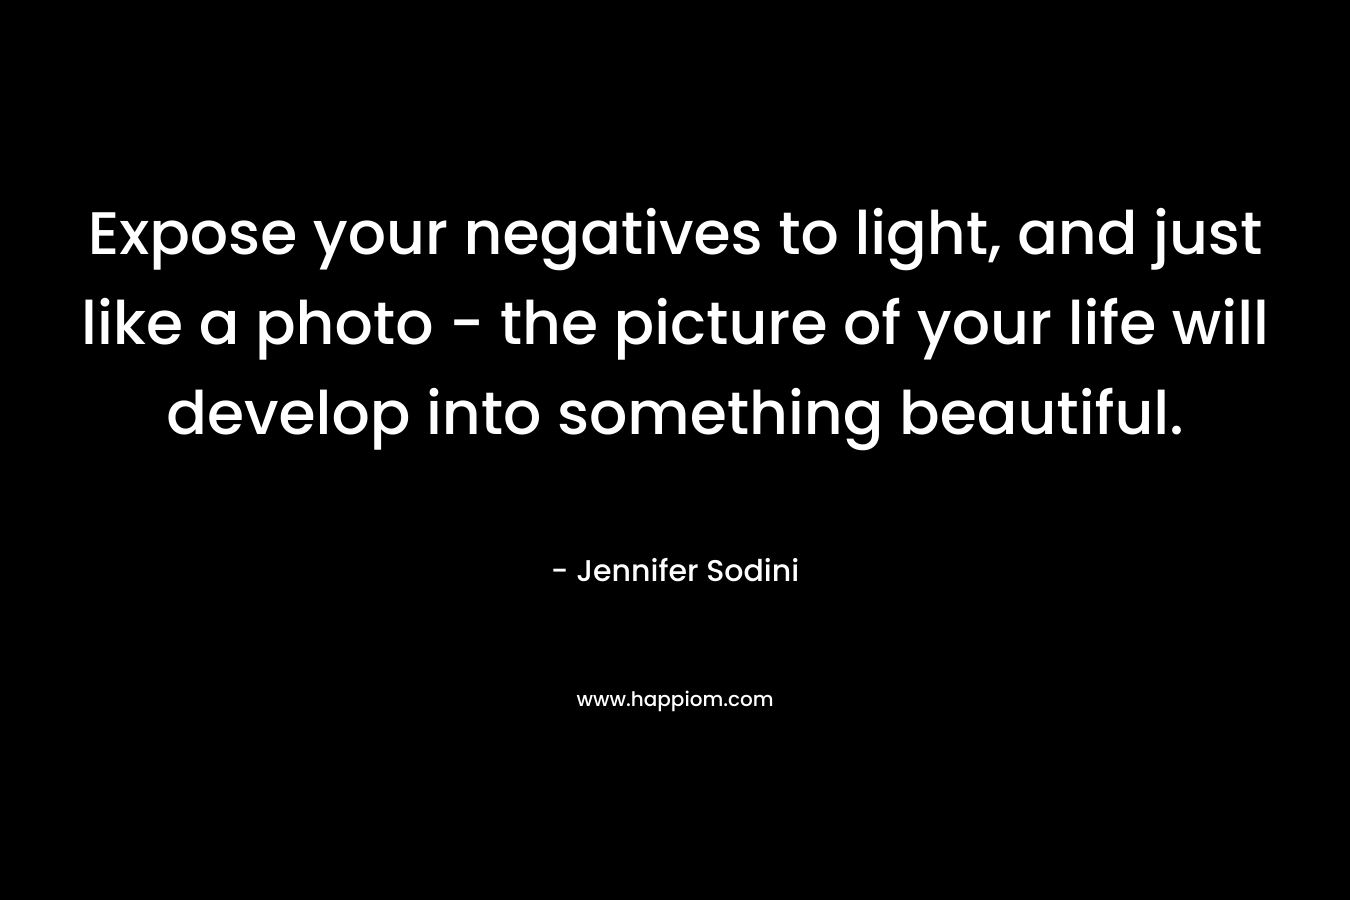 Expose your negatives to light, and just like a photo – the picture of your life will develop into something beautiful. – Jennifer Sodini